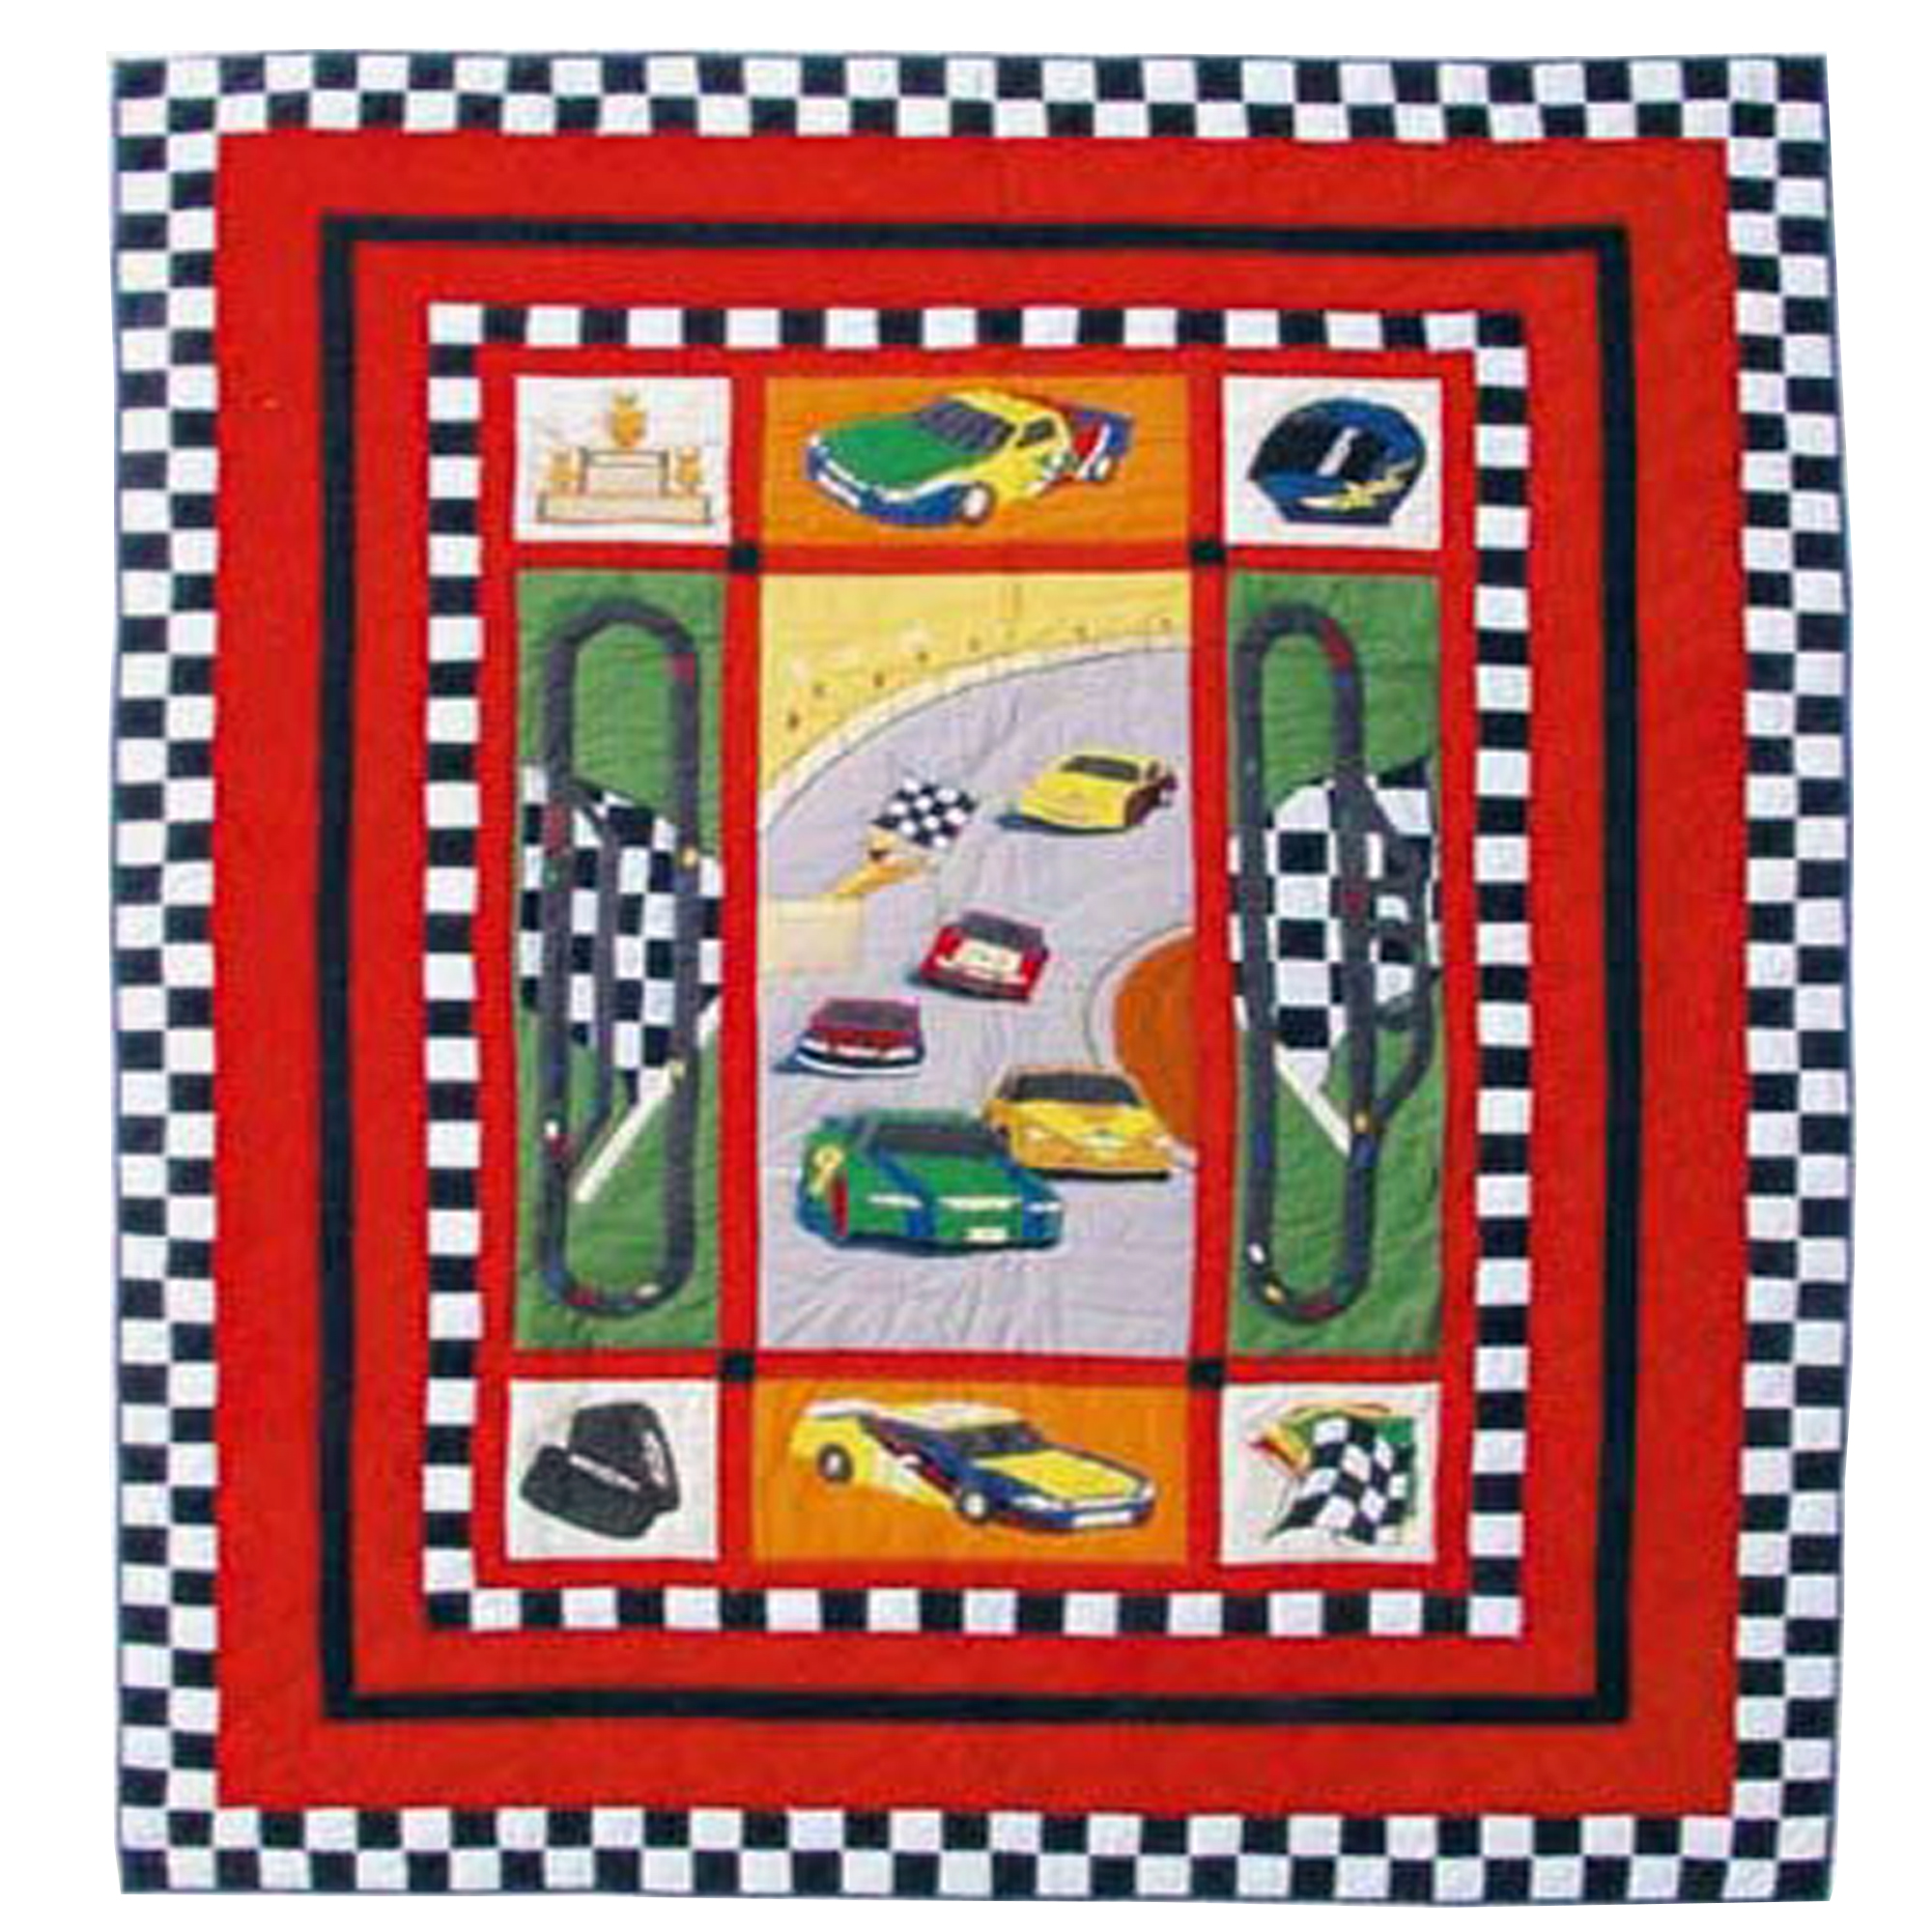 Racecar Queen Quilt 85"W x 95"L - Act now and receive a FREE Shaped Car Rug and Quilted Cotton Throw Pillow Cover. Don't miss out – offer ends soon!